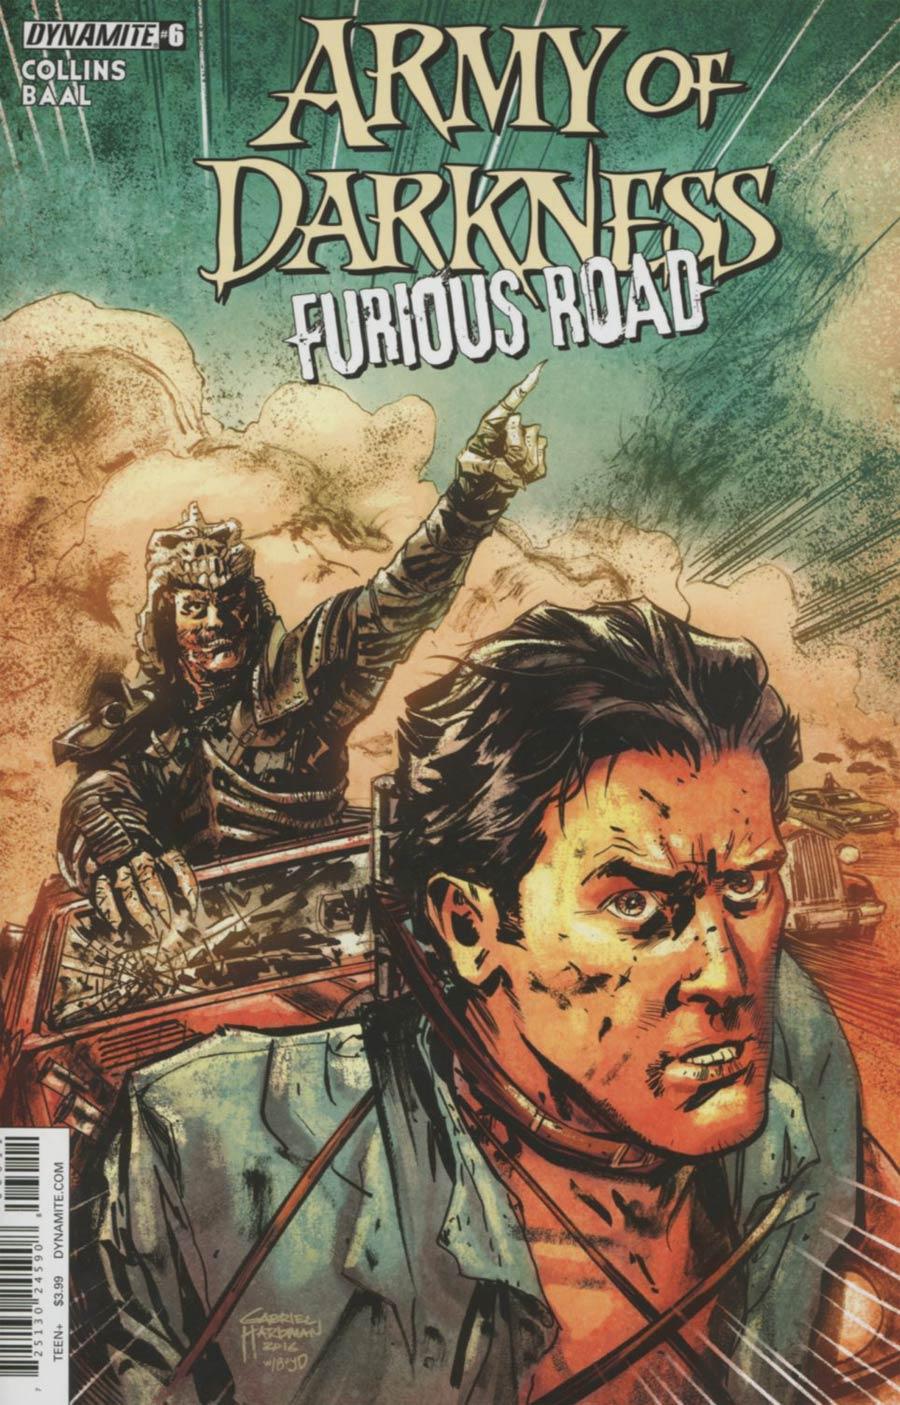 Army Of Darkness Furious Road Vol. 1 #6